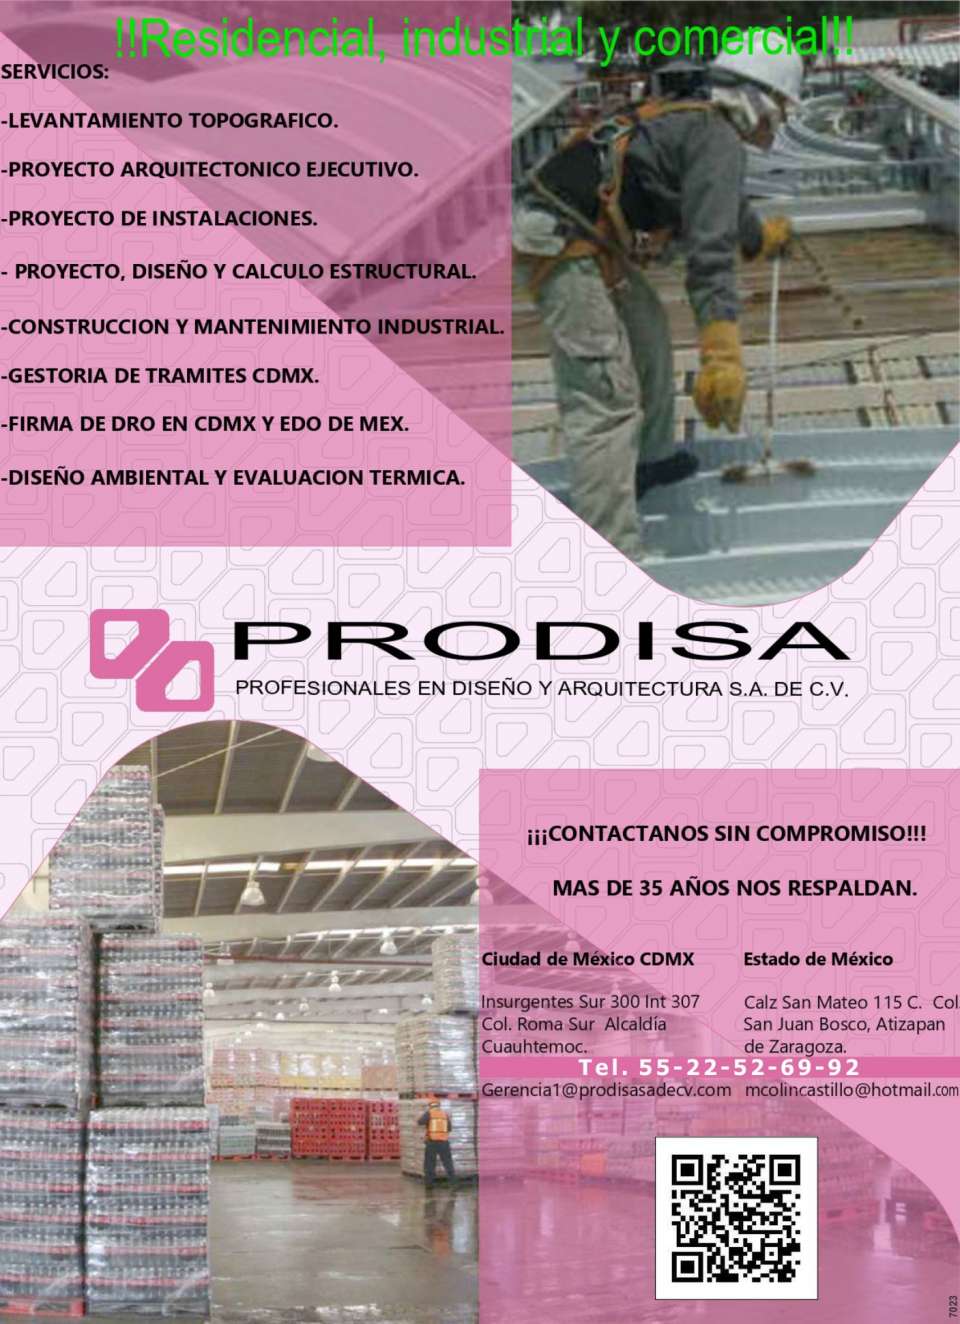 Project and Construction Services. Topographic Survey, Architectural and Installations Project, Structural Design and Calculation, Procedures Management and DRO Firm in CDMX and Mexico State.